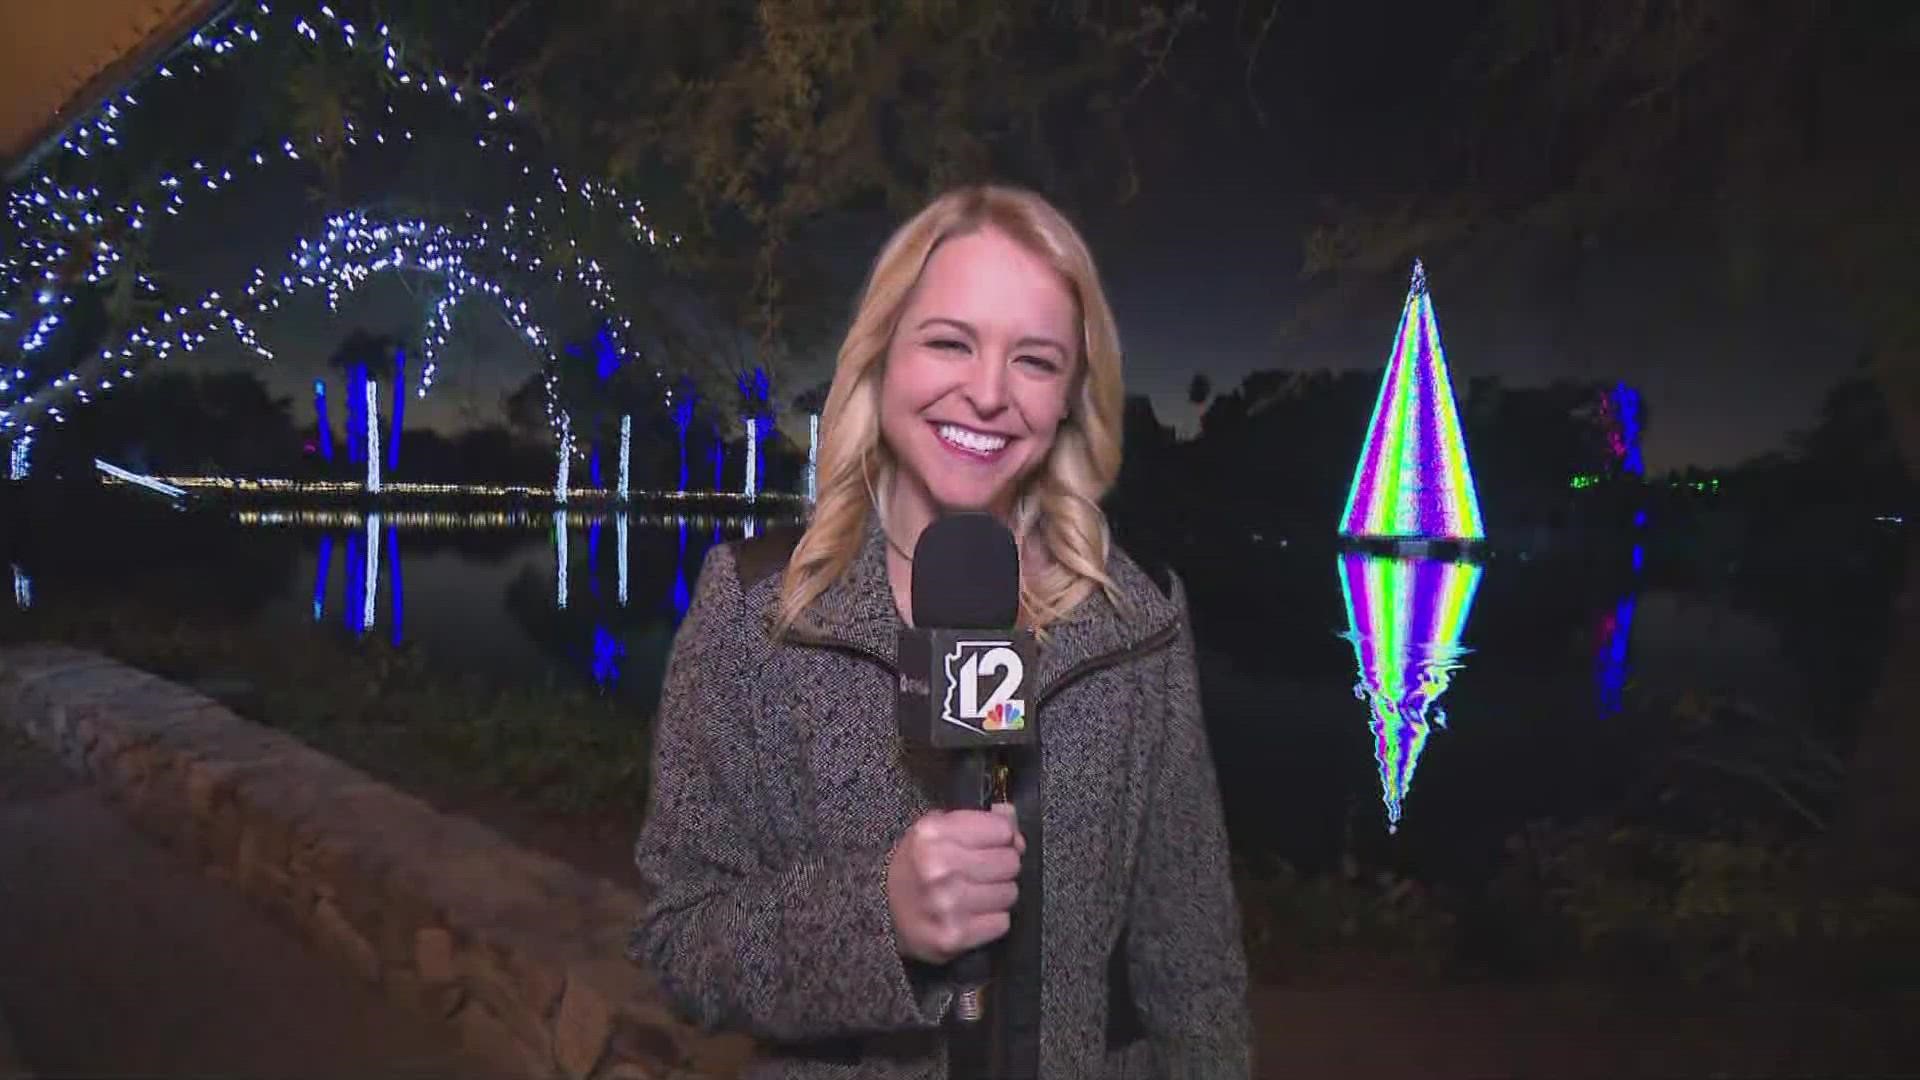 Phoenix ZooLights kicks off tonight at the Phoenix Zoo with more than 3.5 million lights to entertain families across the Valley.